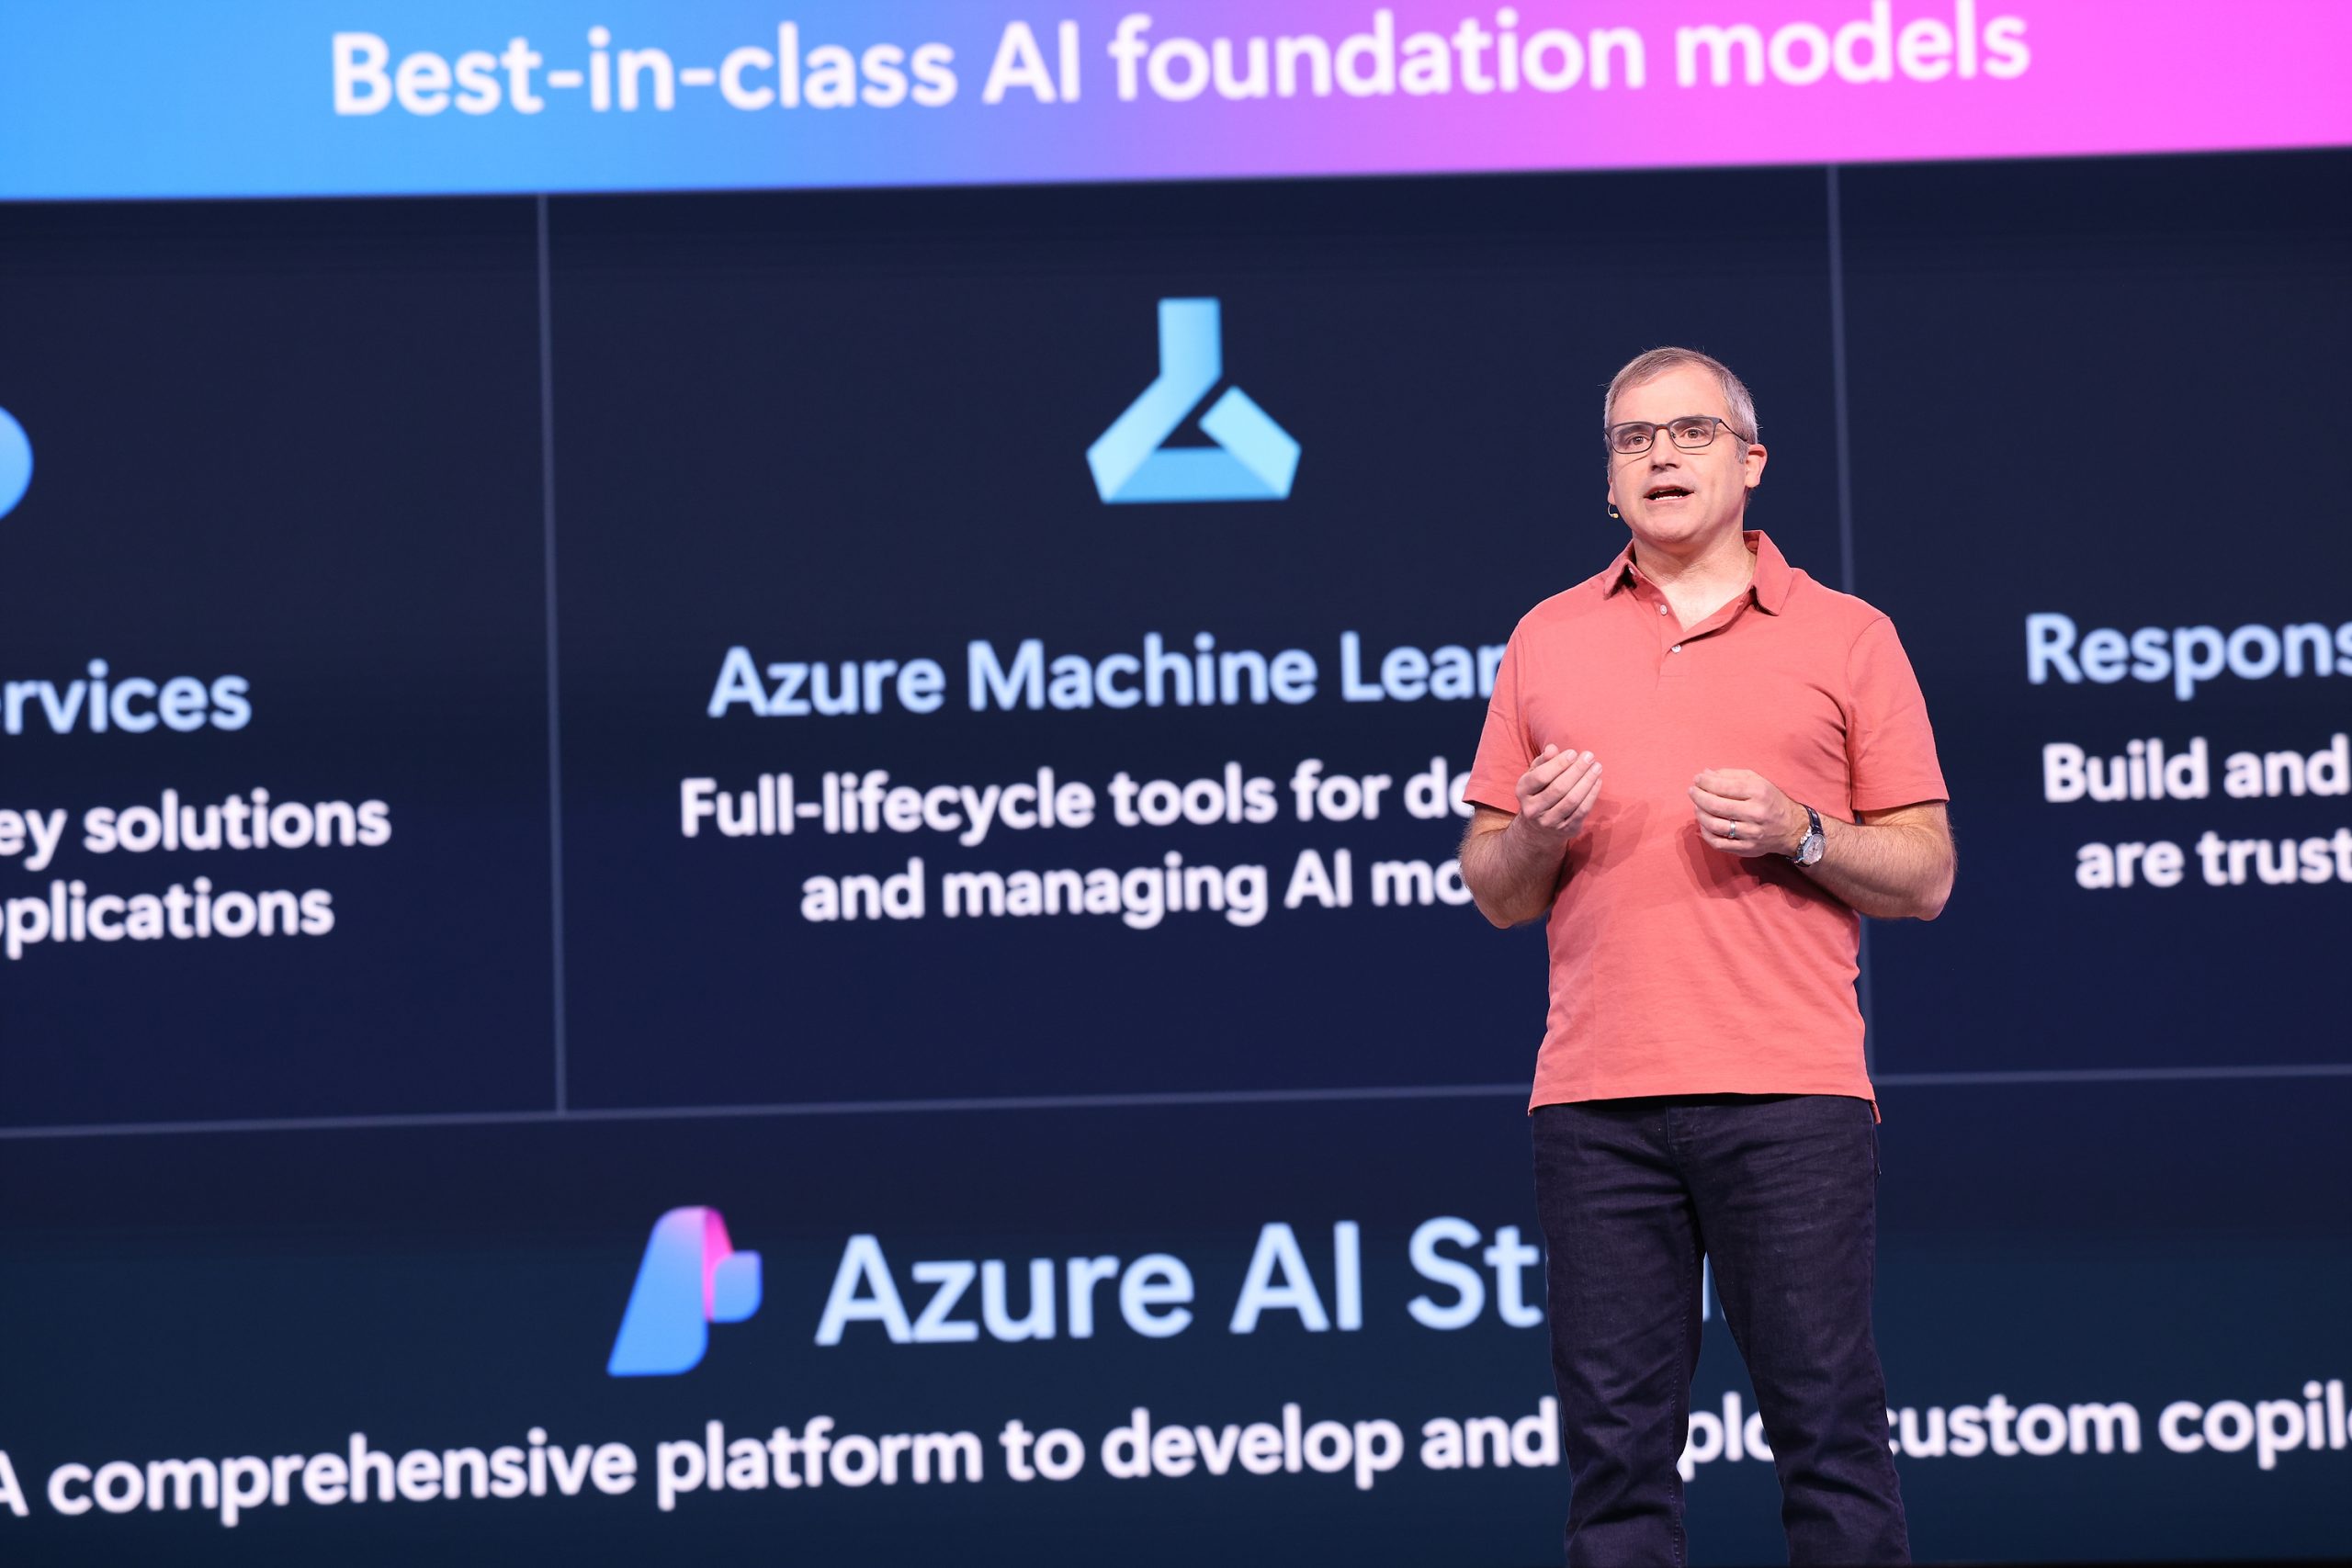 A man standing on stage speaking to an audience with text about best-in-class AI foundation models on a screen behind him